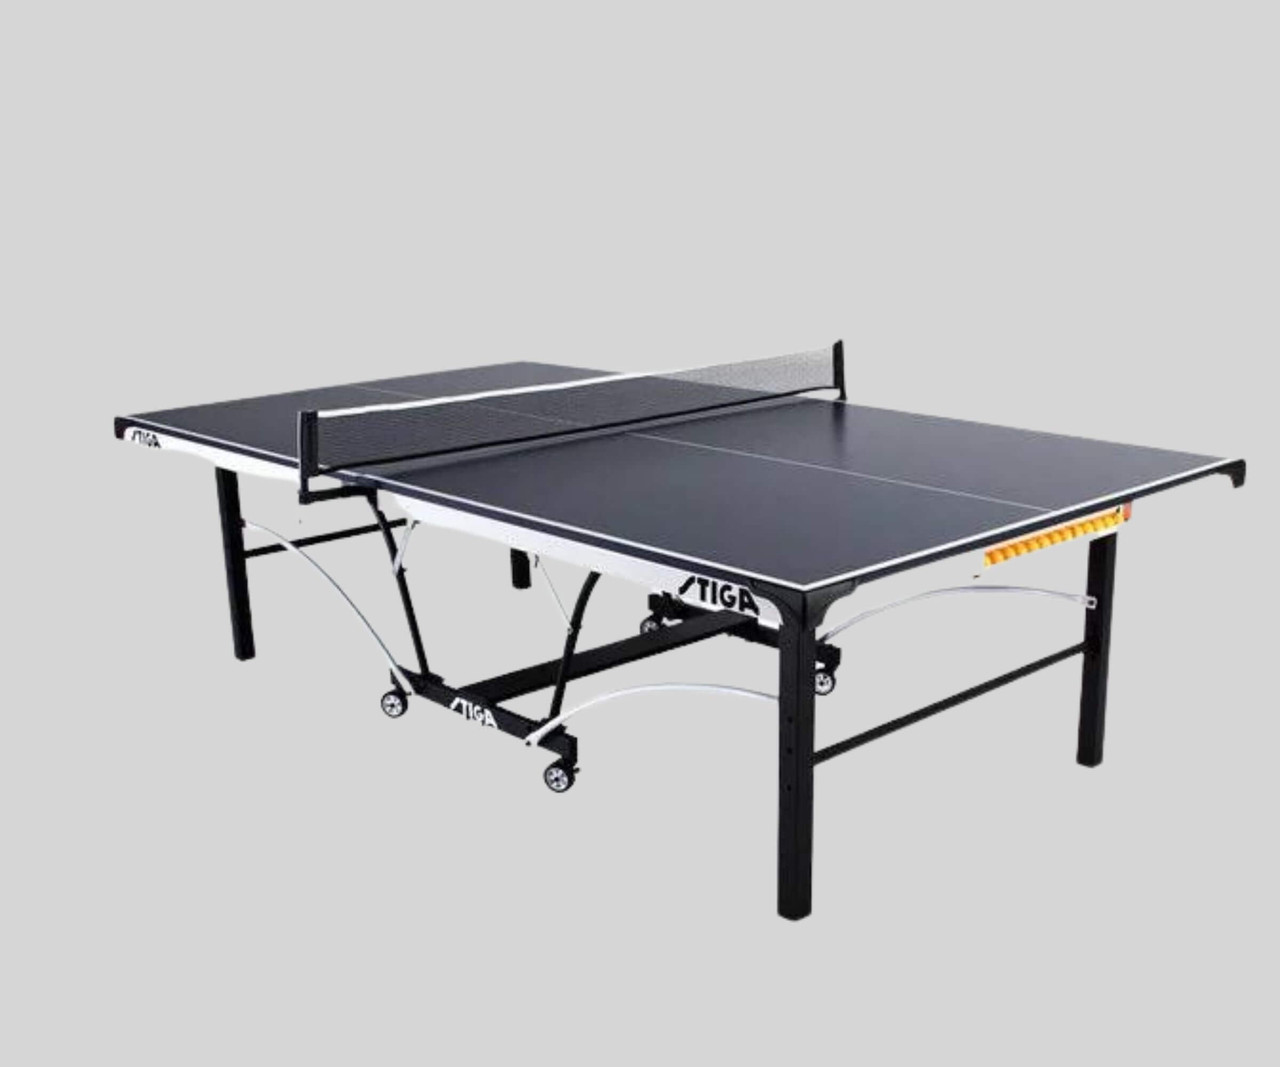 Stiga STS 185 9' Ping Pong Table Quality for Pro and Casual Play